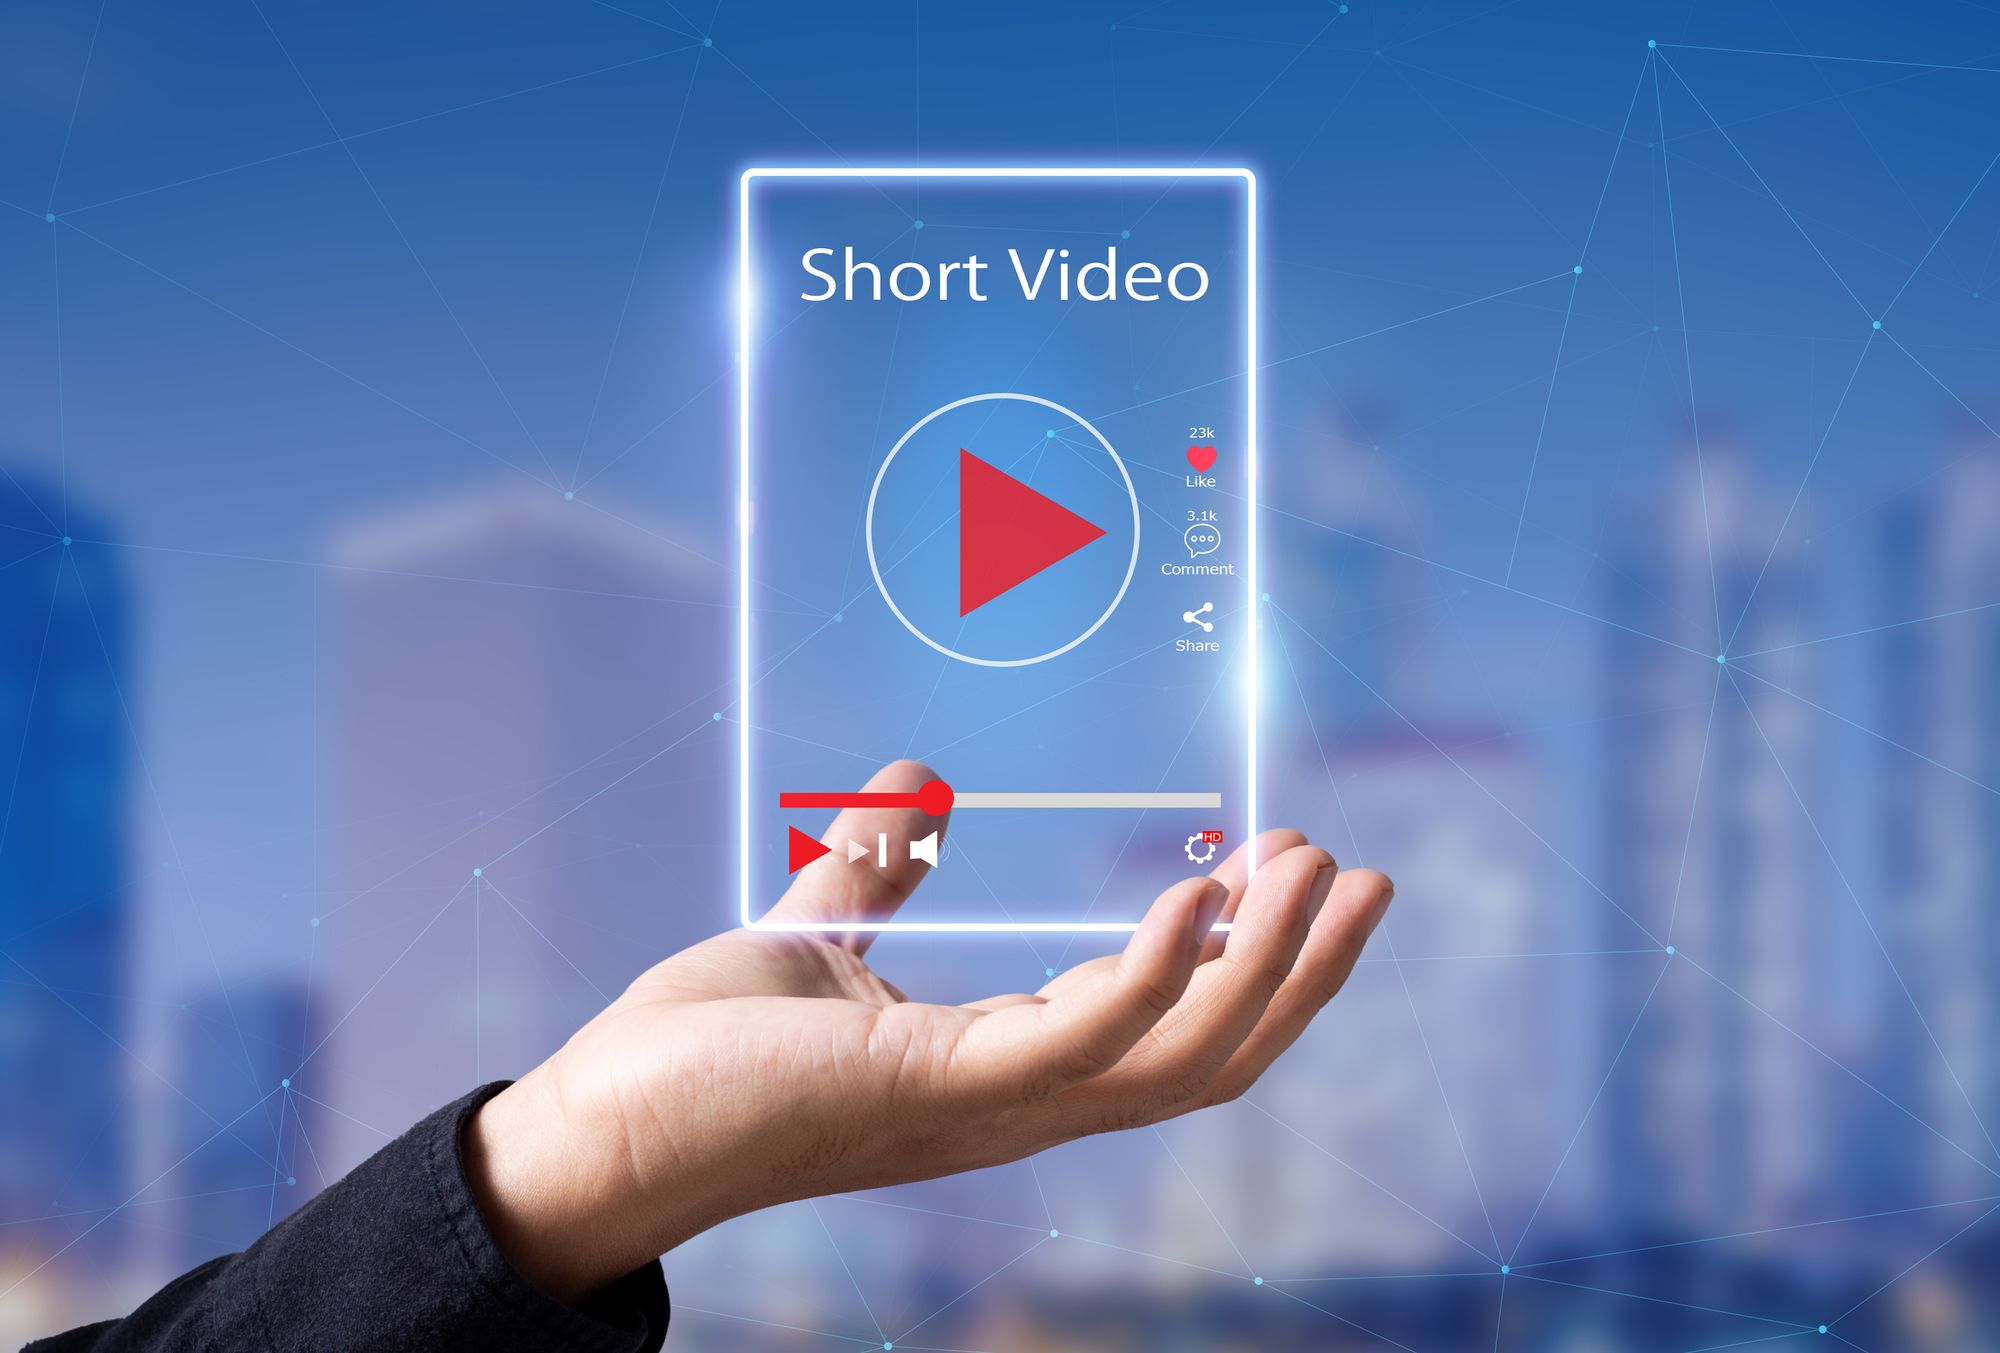 short-video-marketing-conceptman-hands-holding-virtual-short-video-player-with-blurred-city-as-background--1-.jpg